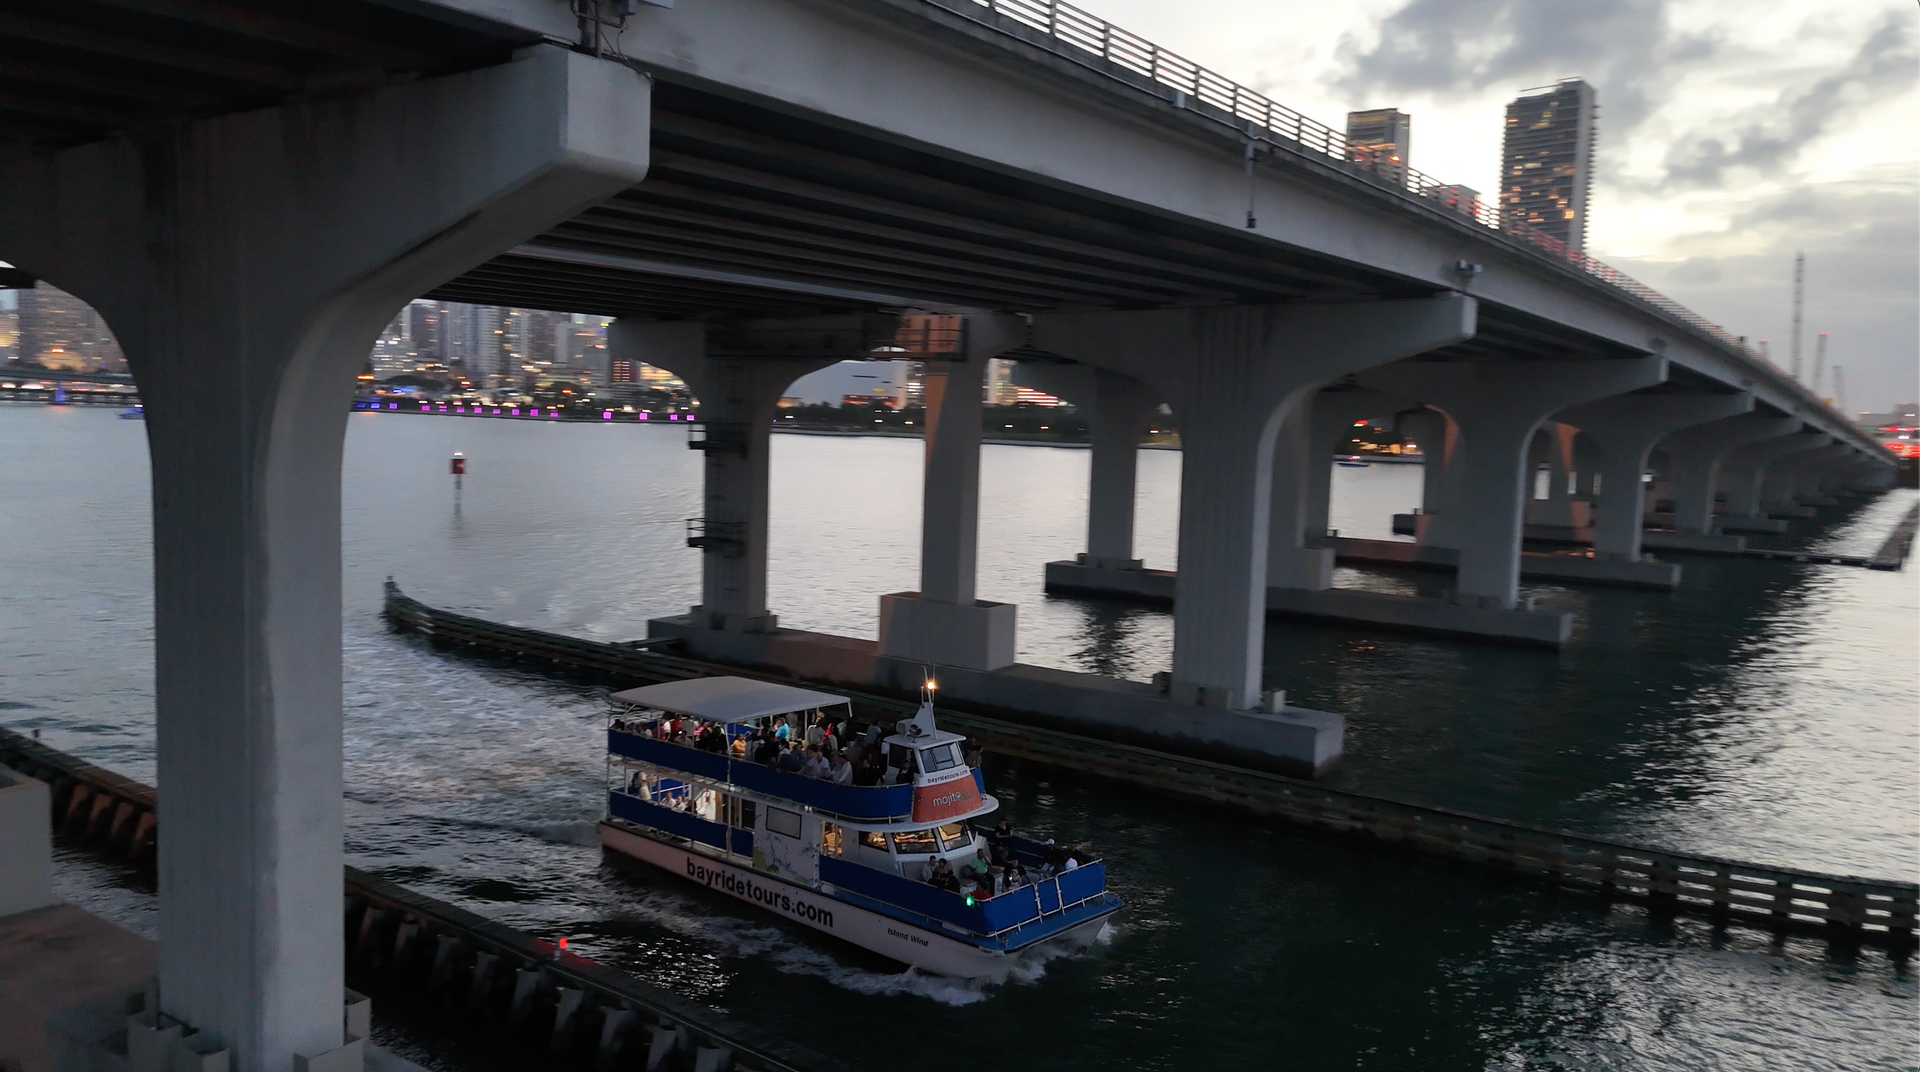 Our Miami Cruise always takes you under the Douglas MacArthur Causeway, its part of our tour. Our Local guide will mention great points and interesting facts about this bridge, like movies like Bad Boys 2 and True Lies were filmed on this bridge. South Beach!